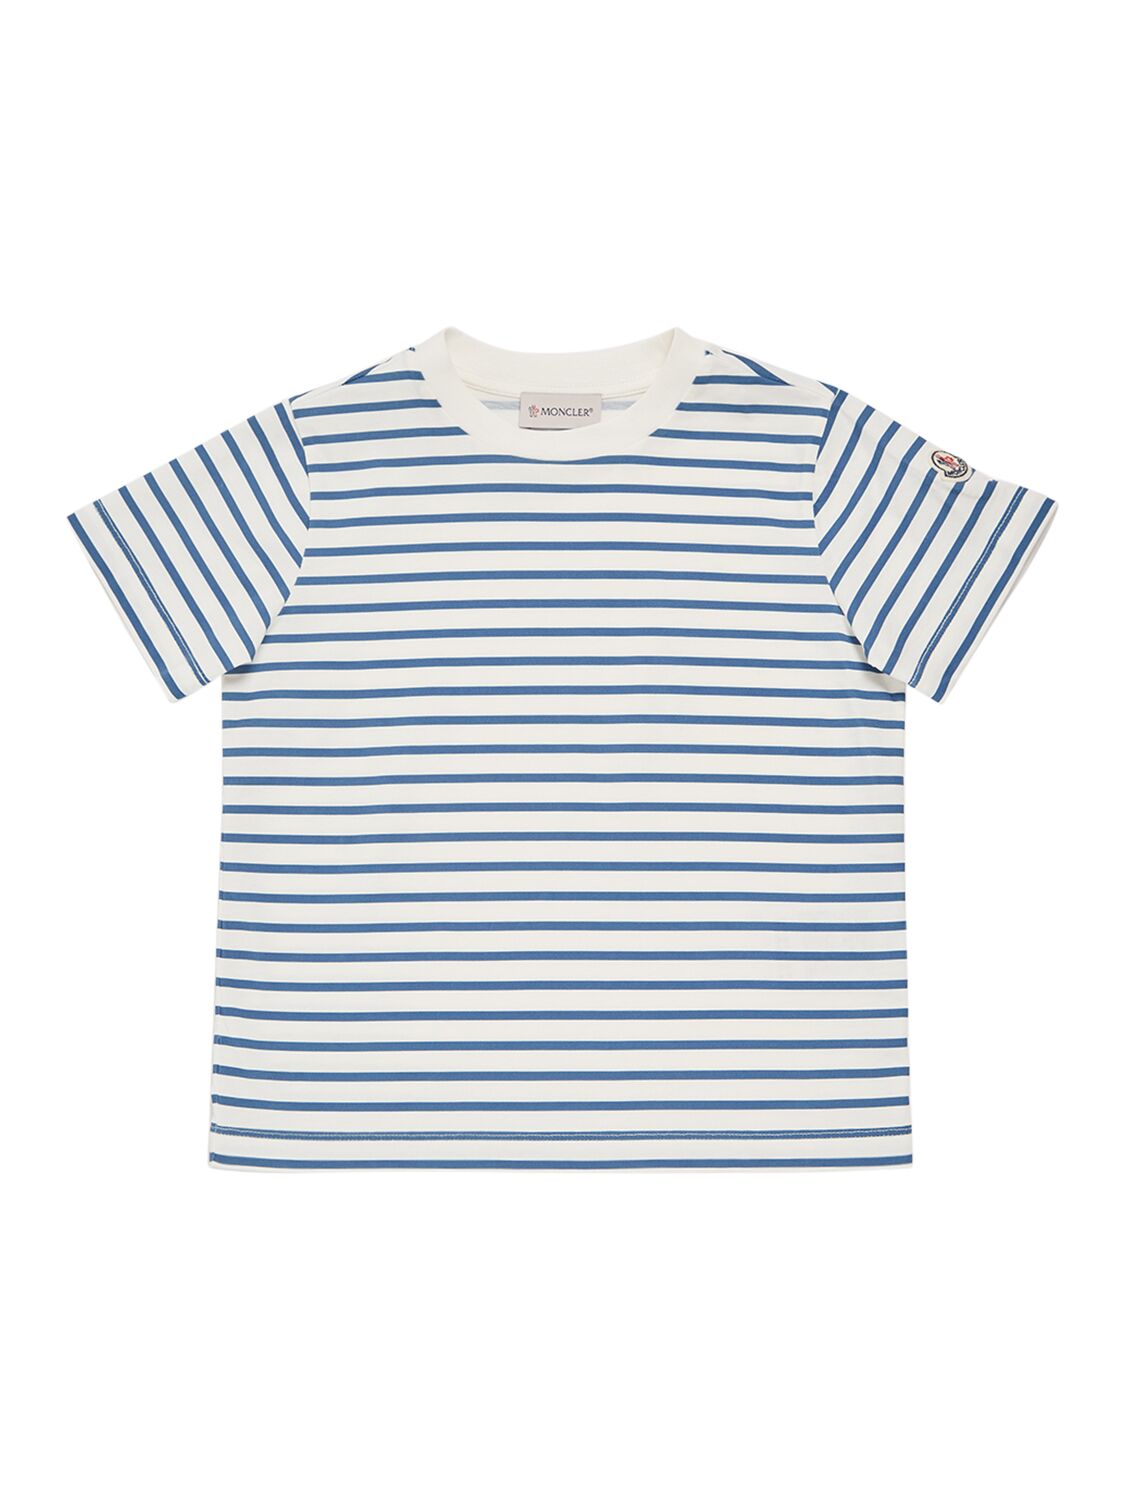 Image of Striped Cotton T-shirt